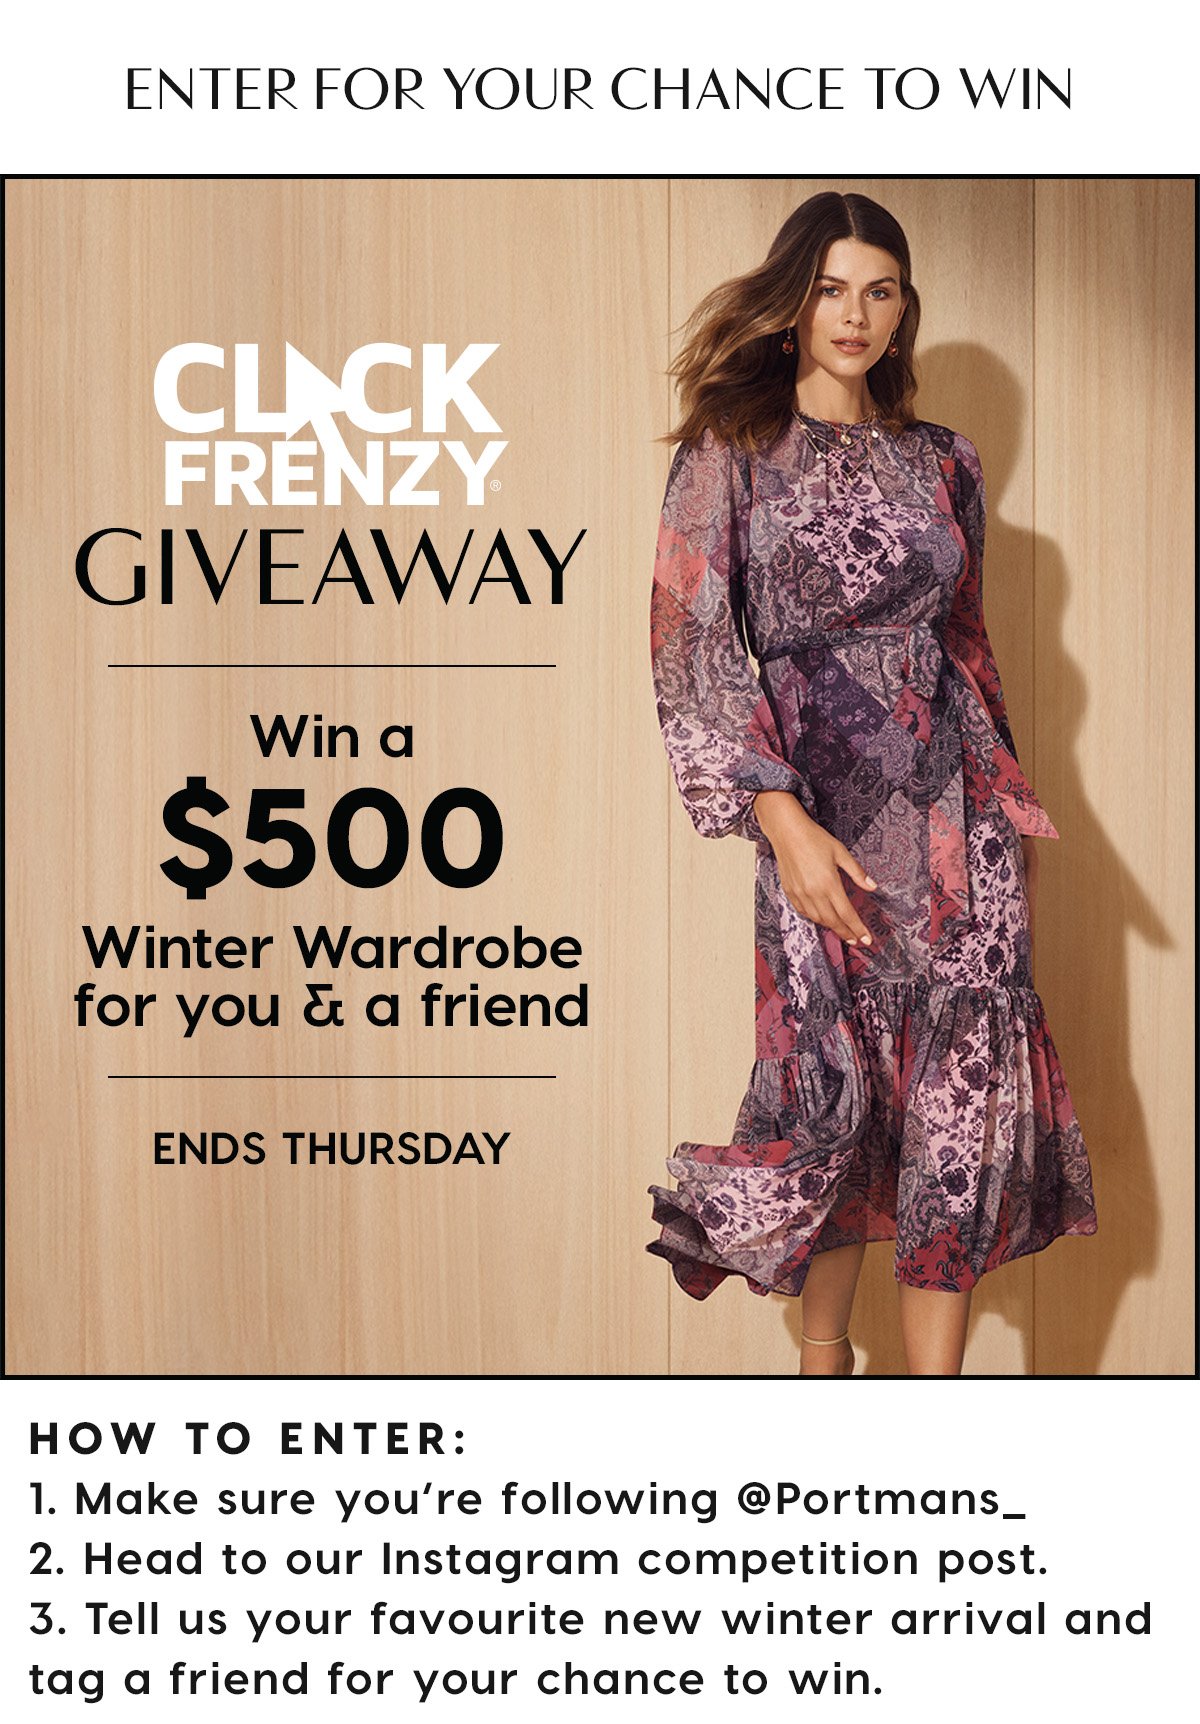 Click Frenzy Giveaway. Win a $500 Winter Wardrobe for you & a friend. Ends Thursday